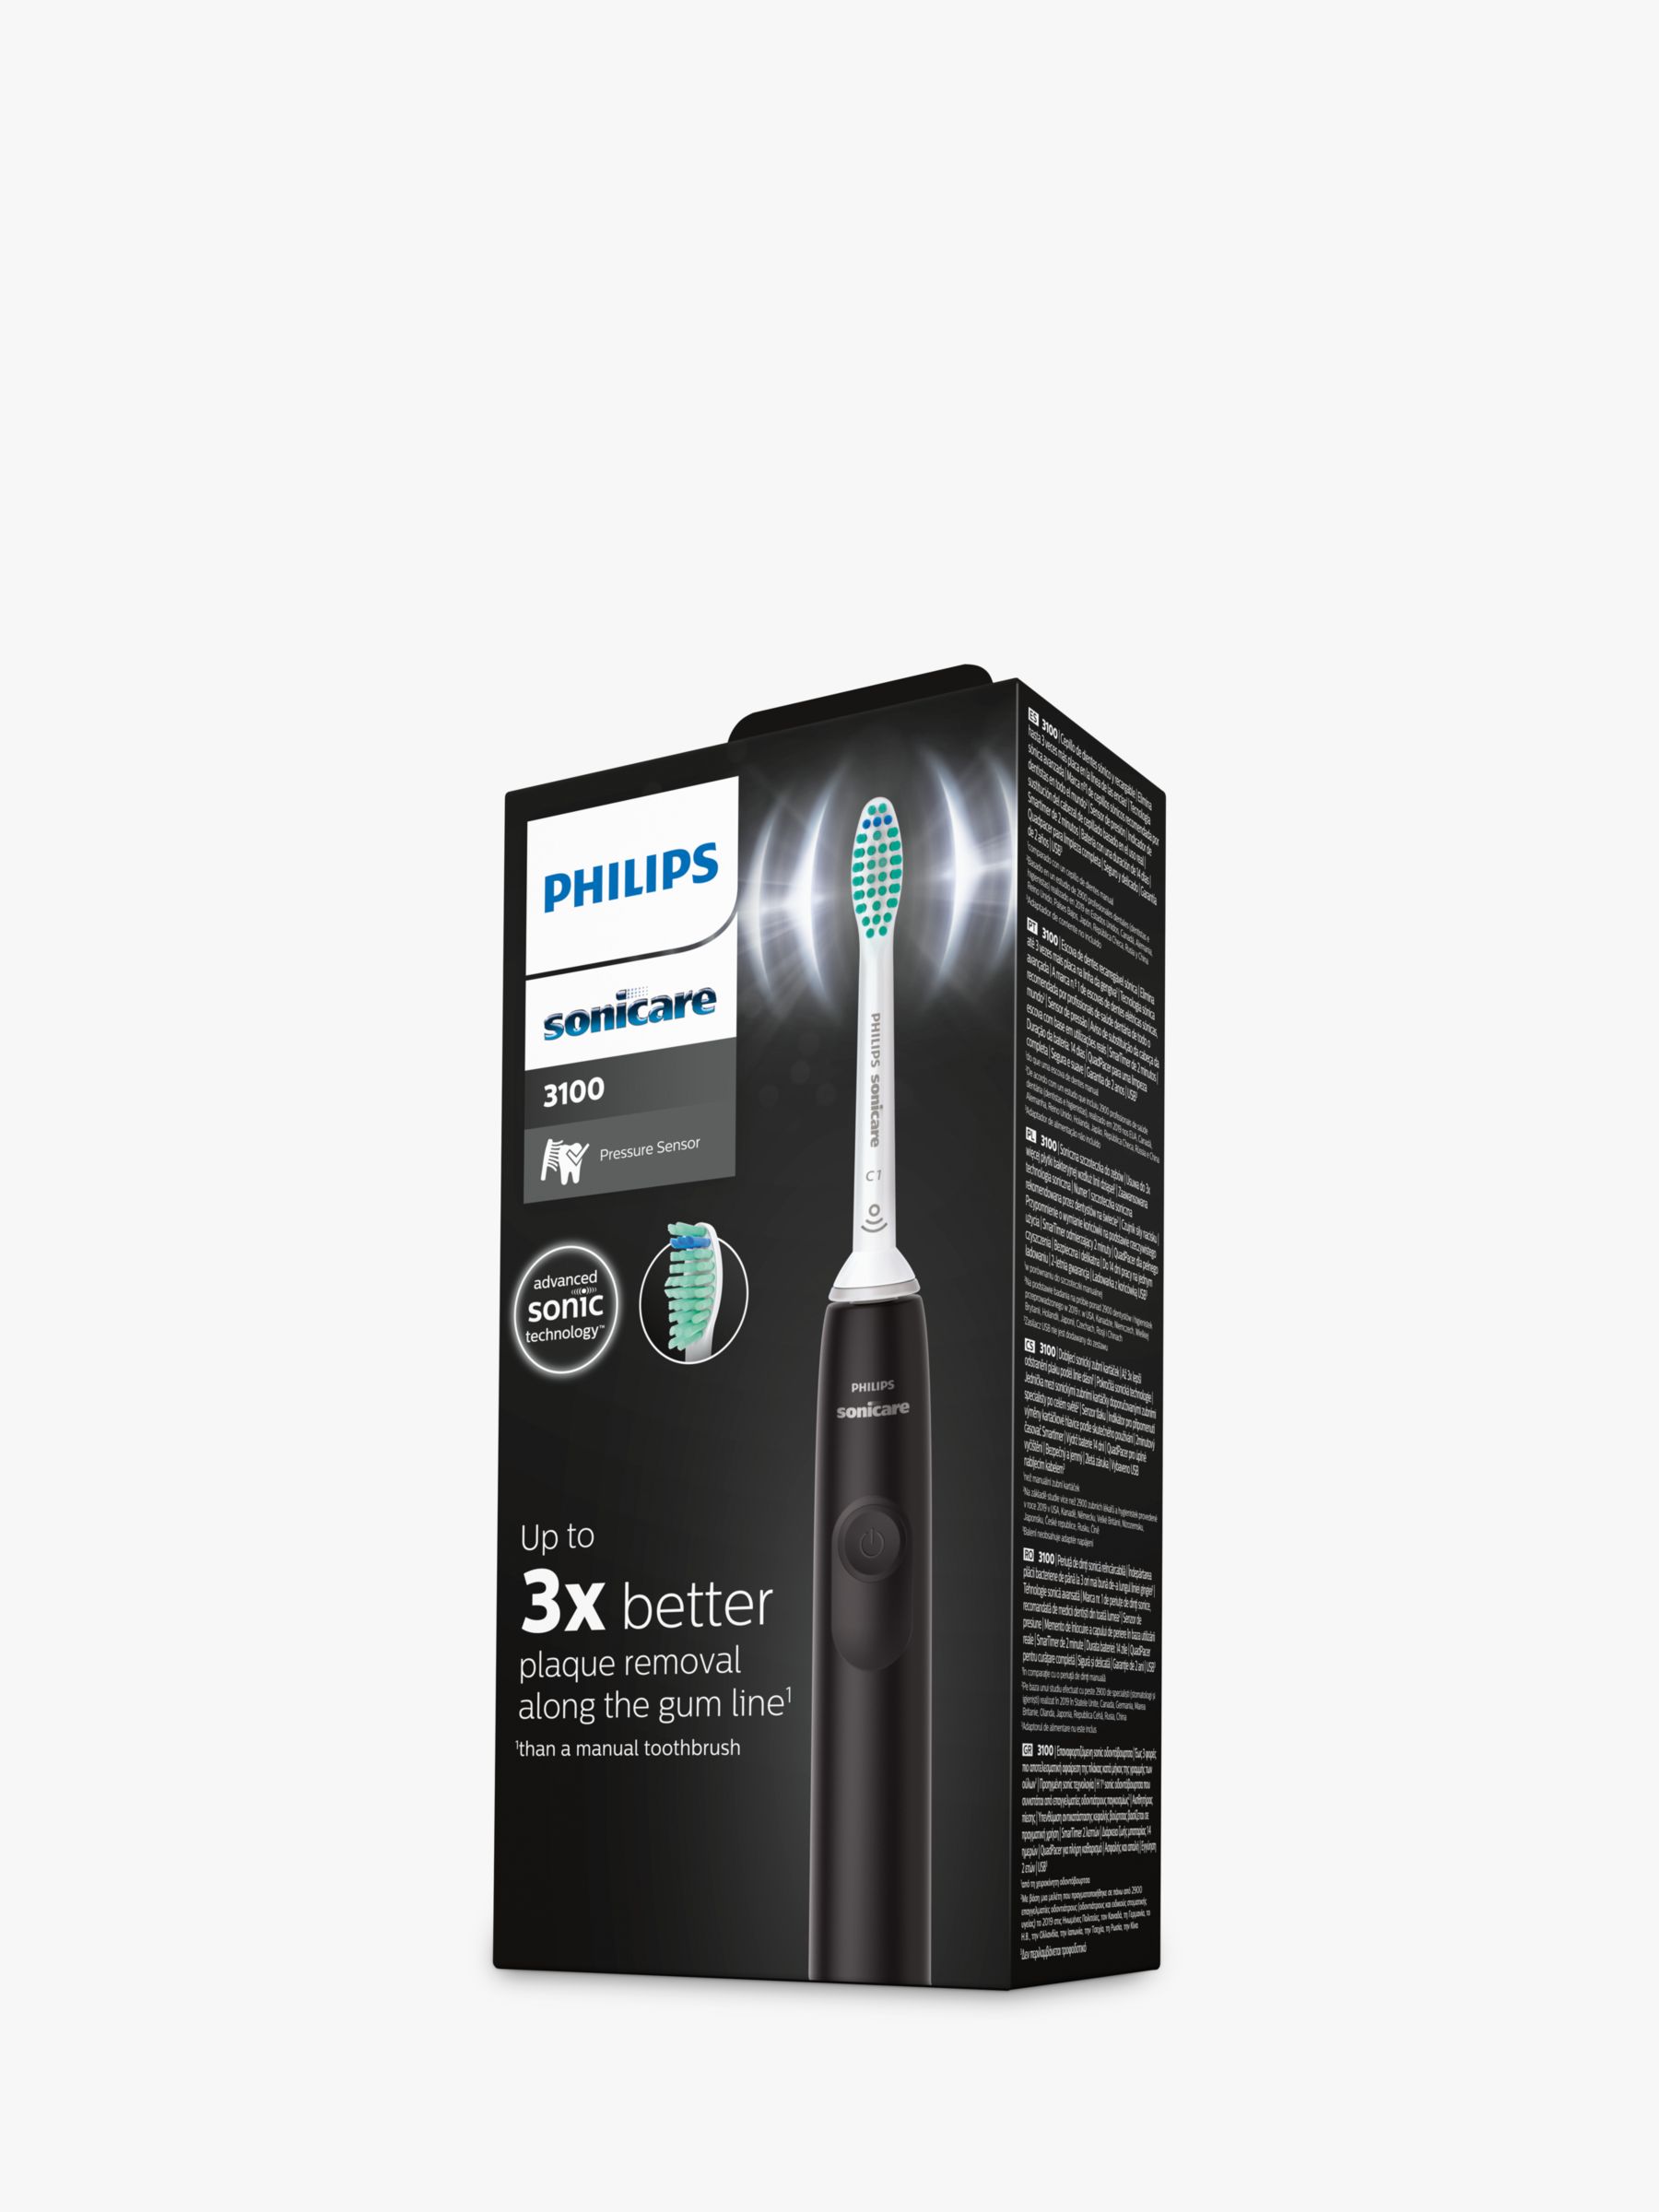 Philips Sonicare Series 3100 Electric Toothbrush, Black